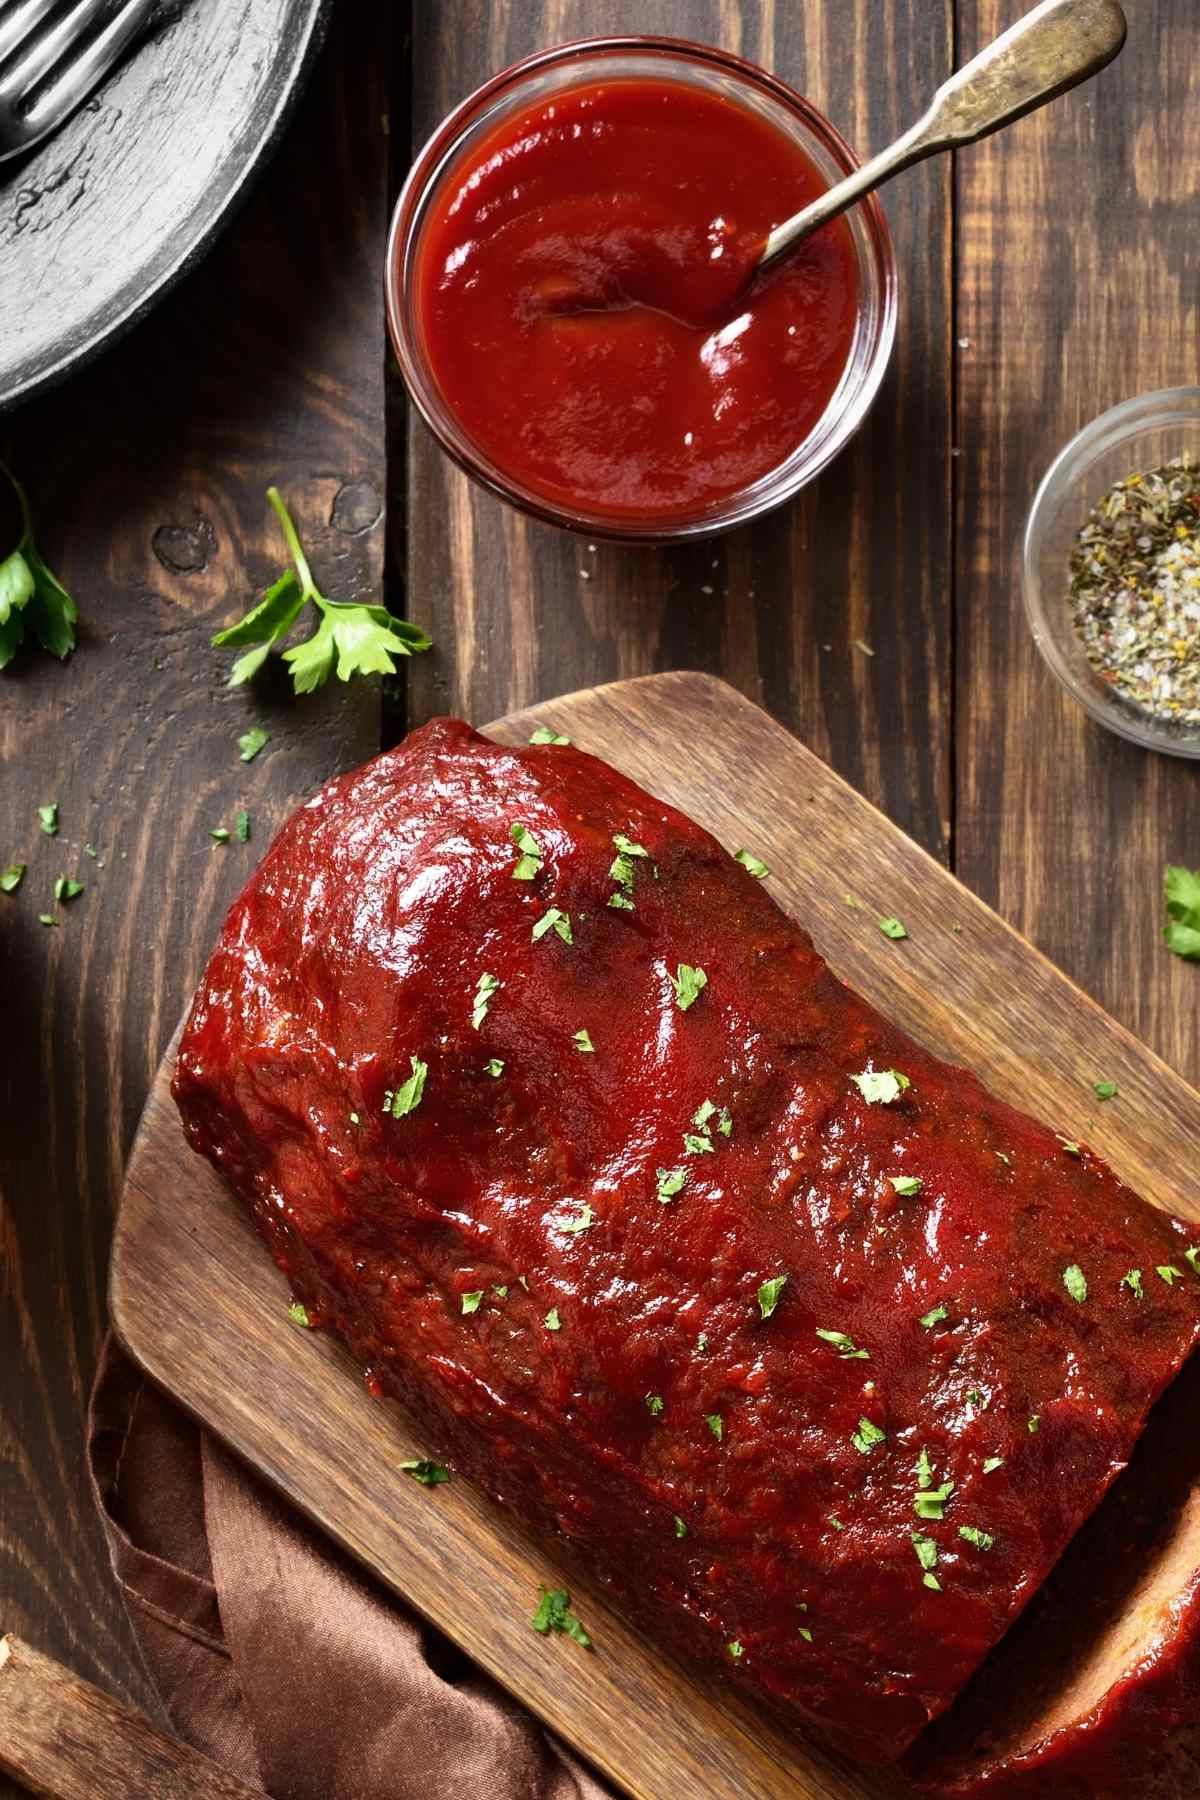 Meatloaf Recipe With Ketchup Glaze | Dandk Organizer